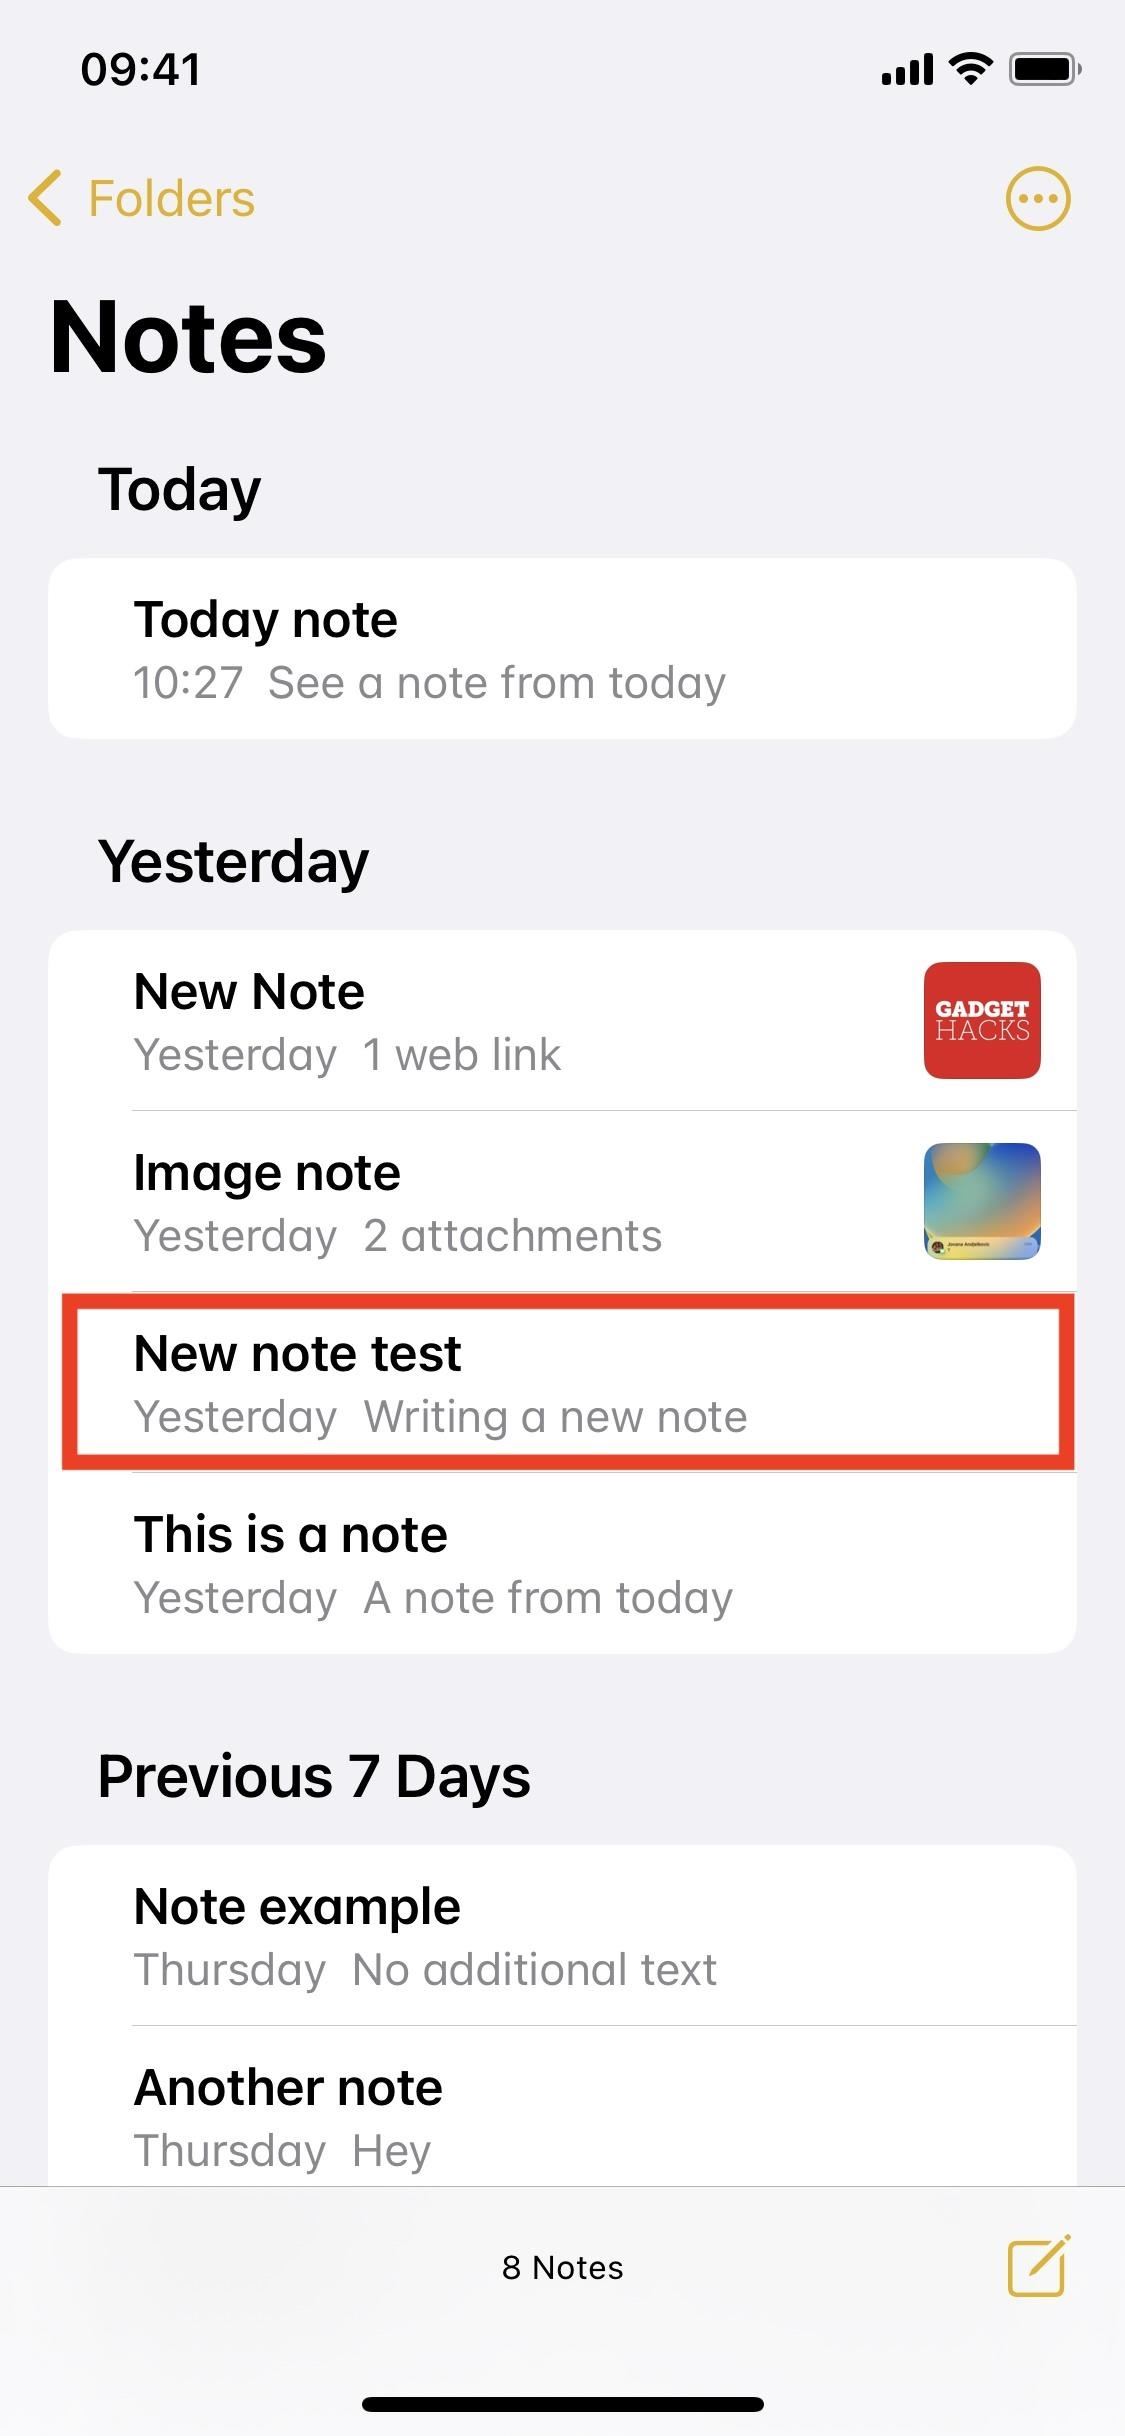 Apple Notes Has 13 New Features/Upgrades in iOS 16 You Should Know About